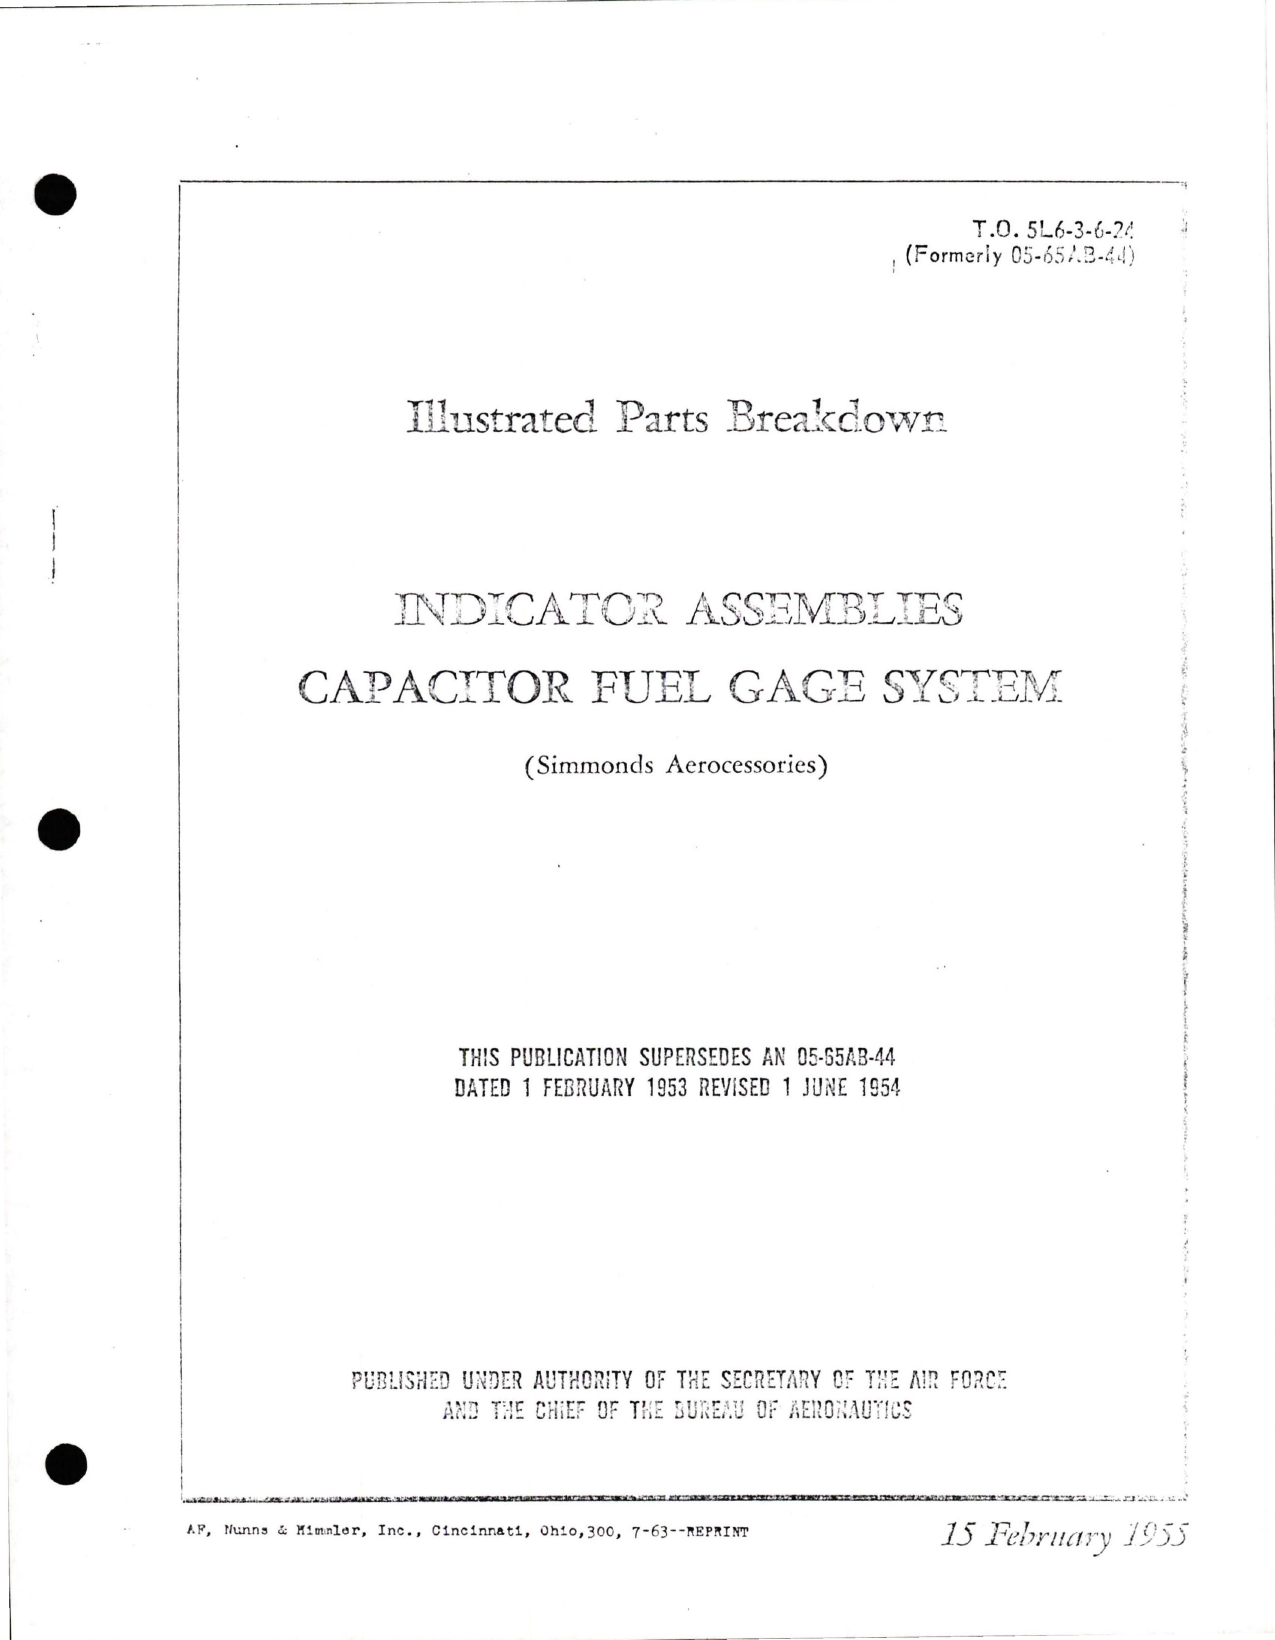 Sample page 1 from AirCorps Library document: Capacitor Fuel Gage System Indicator Assemblies